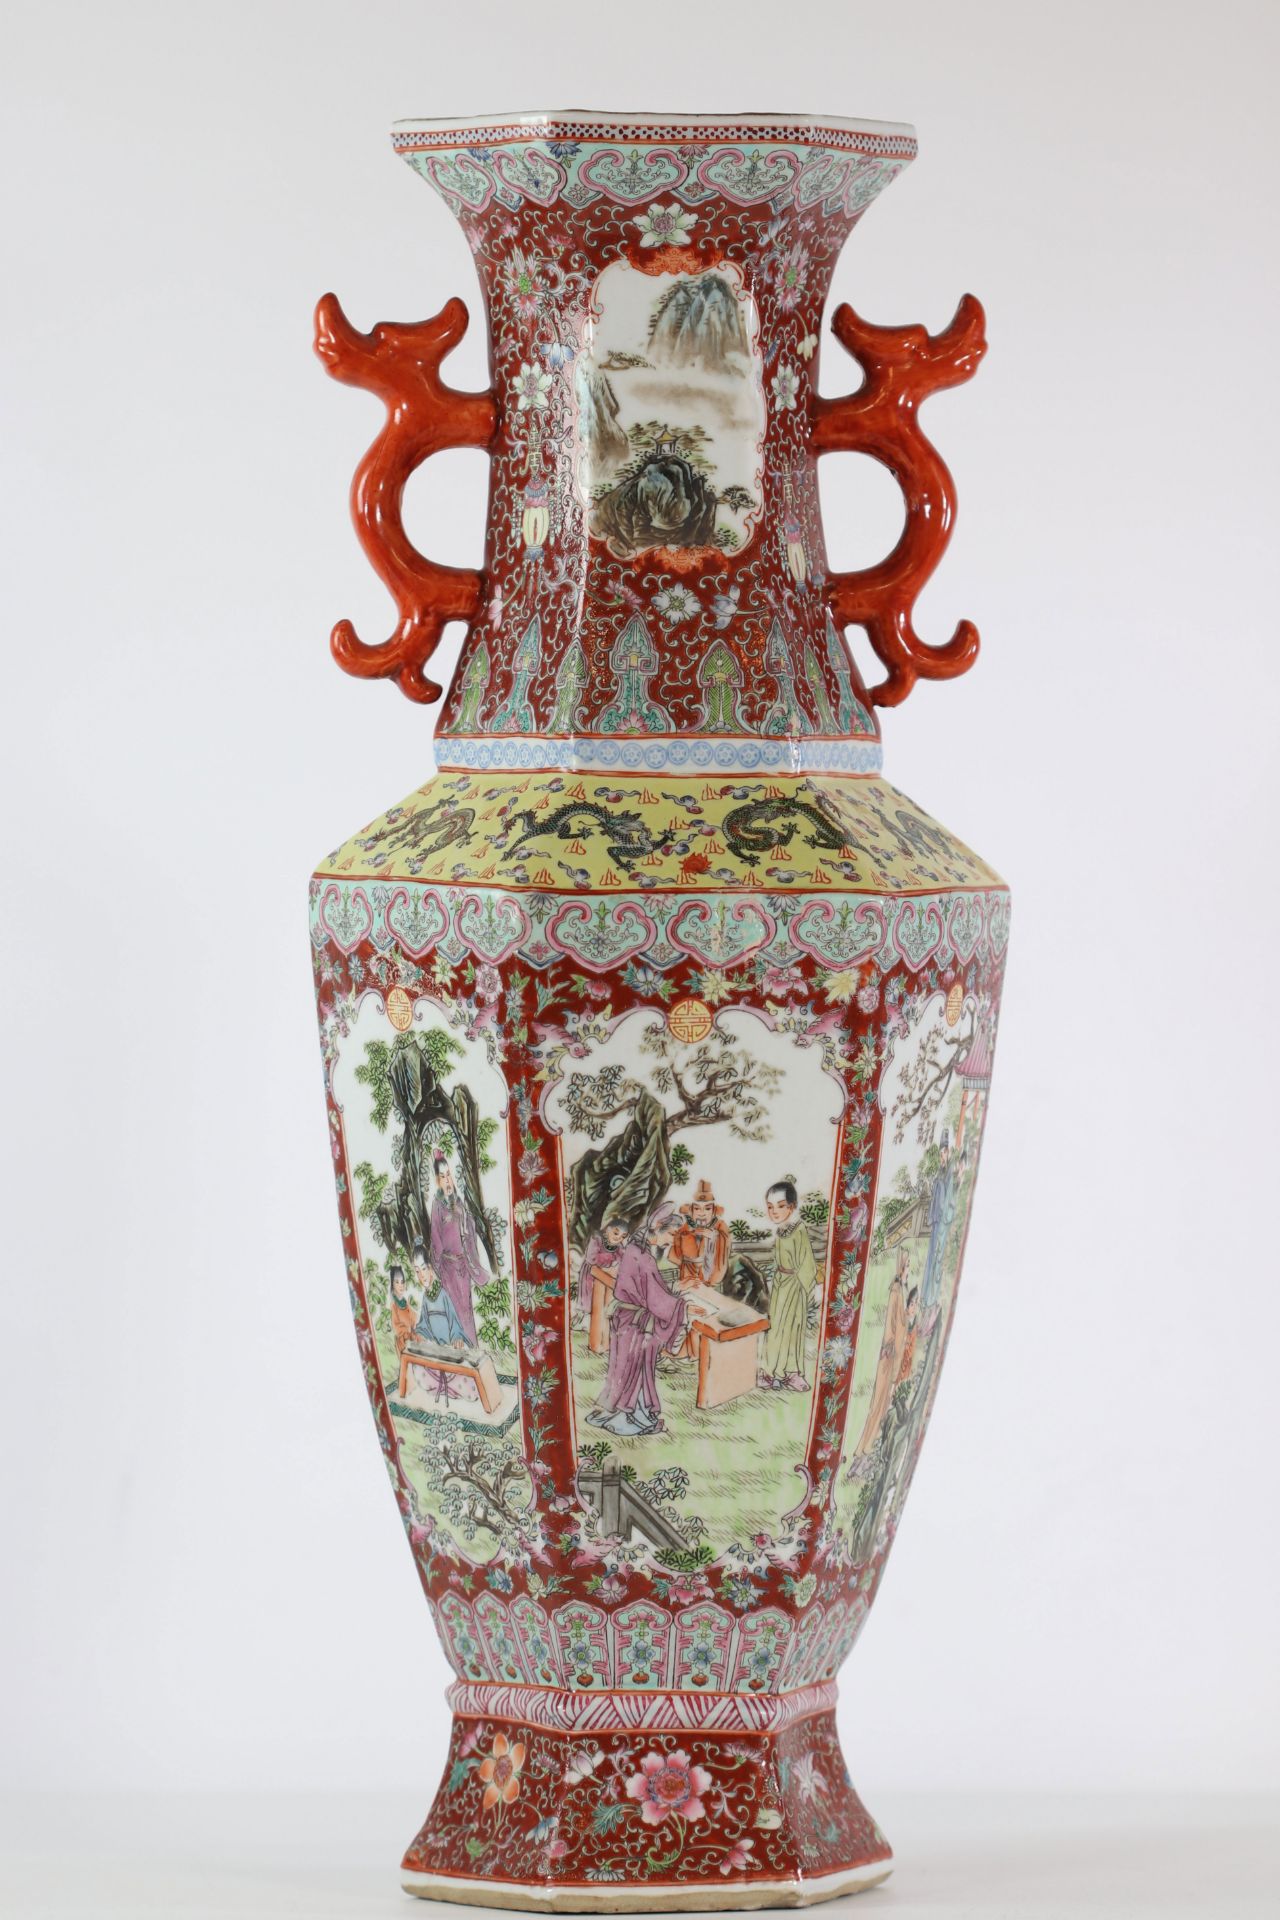 China porcelain vase decorated with characters from the republic period